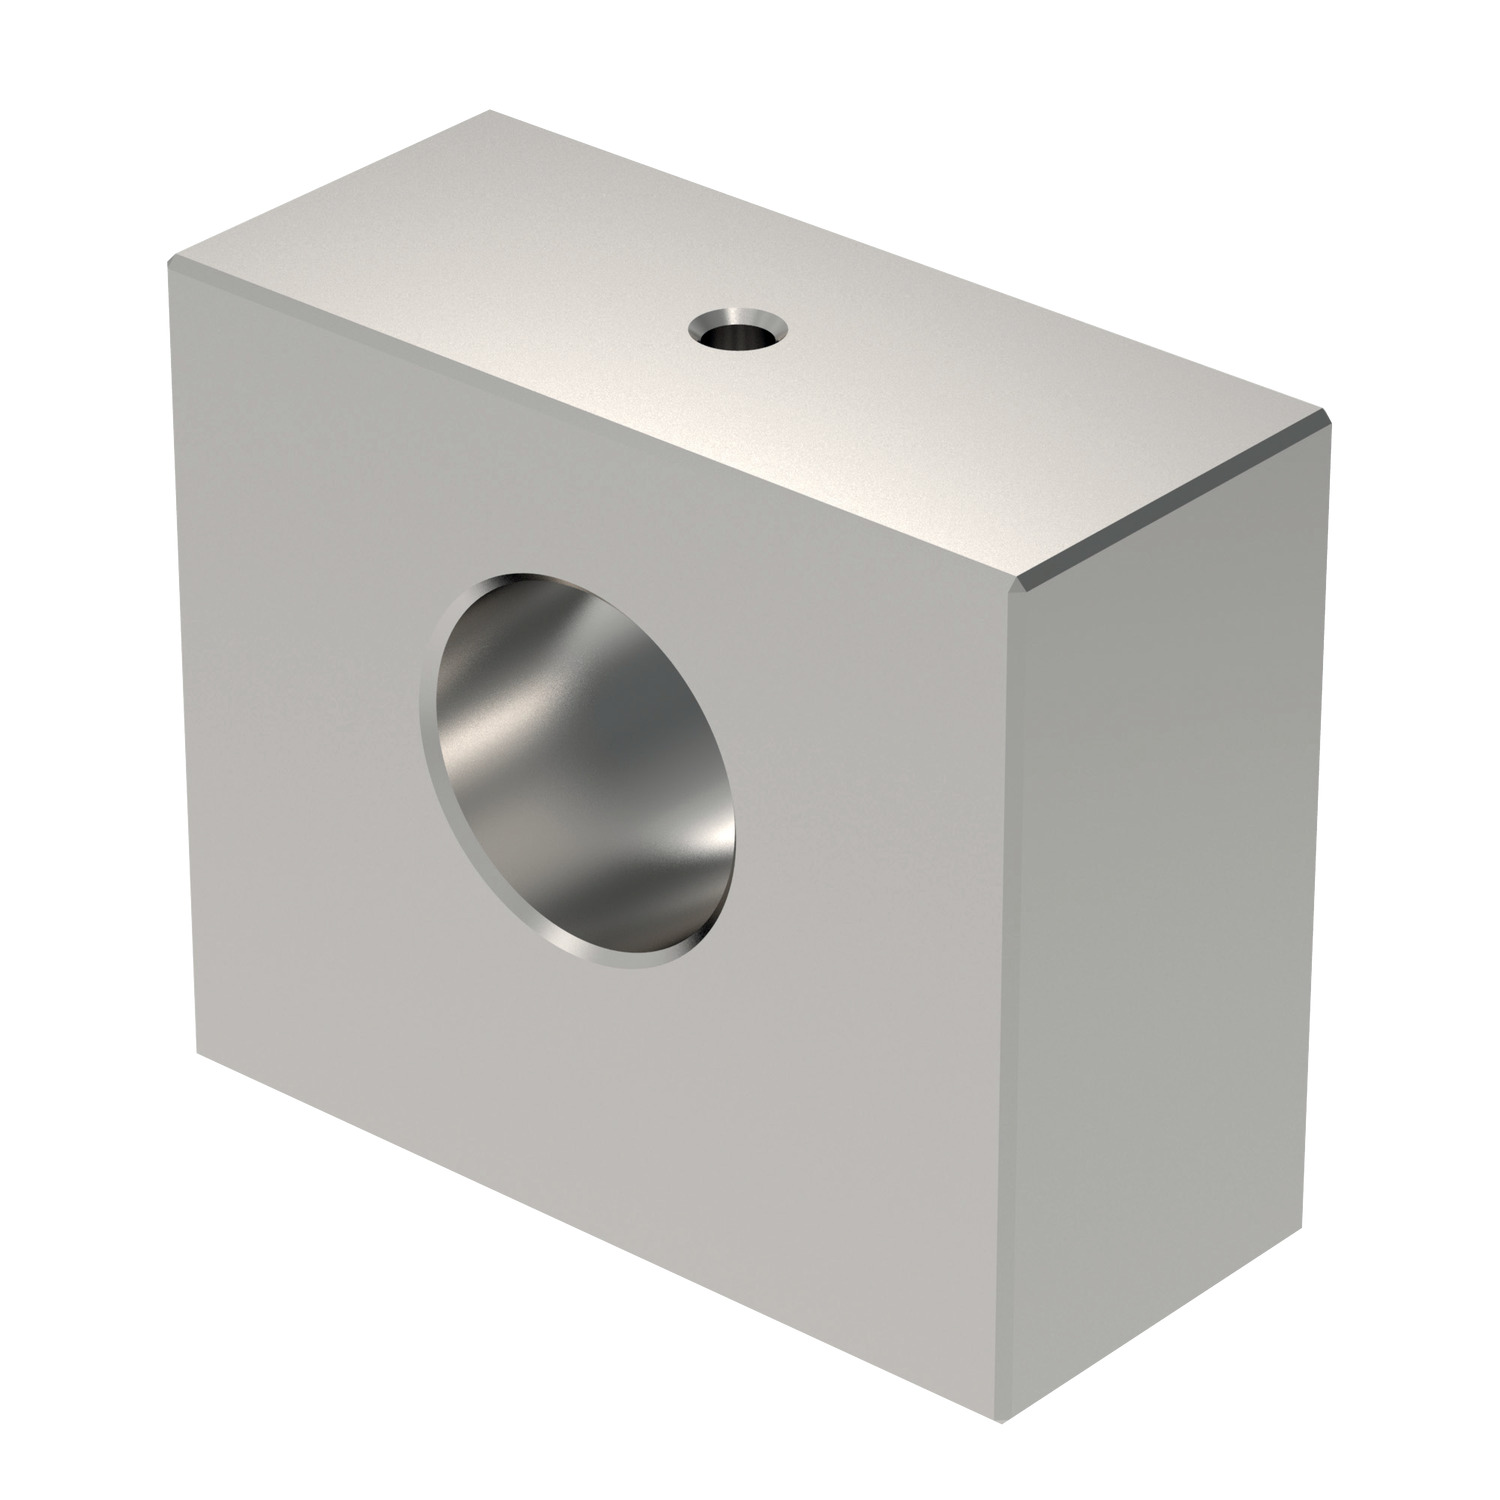 Product L1779.A4, Shaft End Supports 316 series stainless steel / 